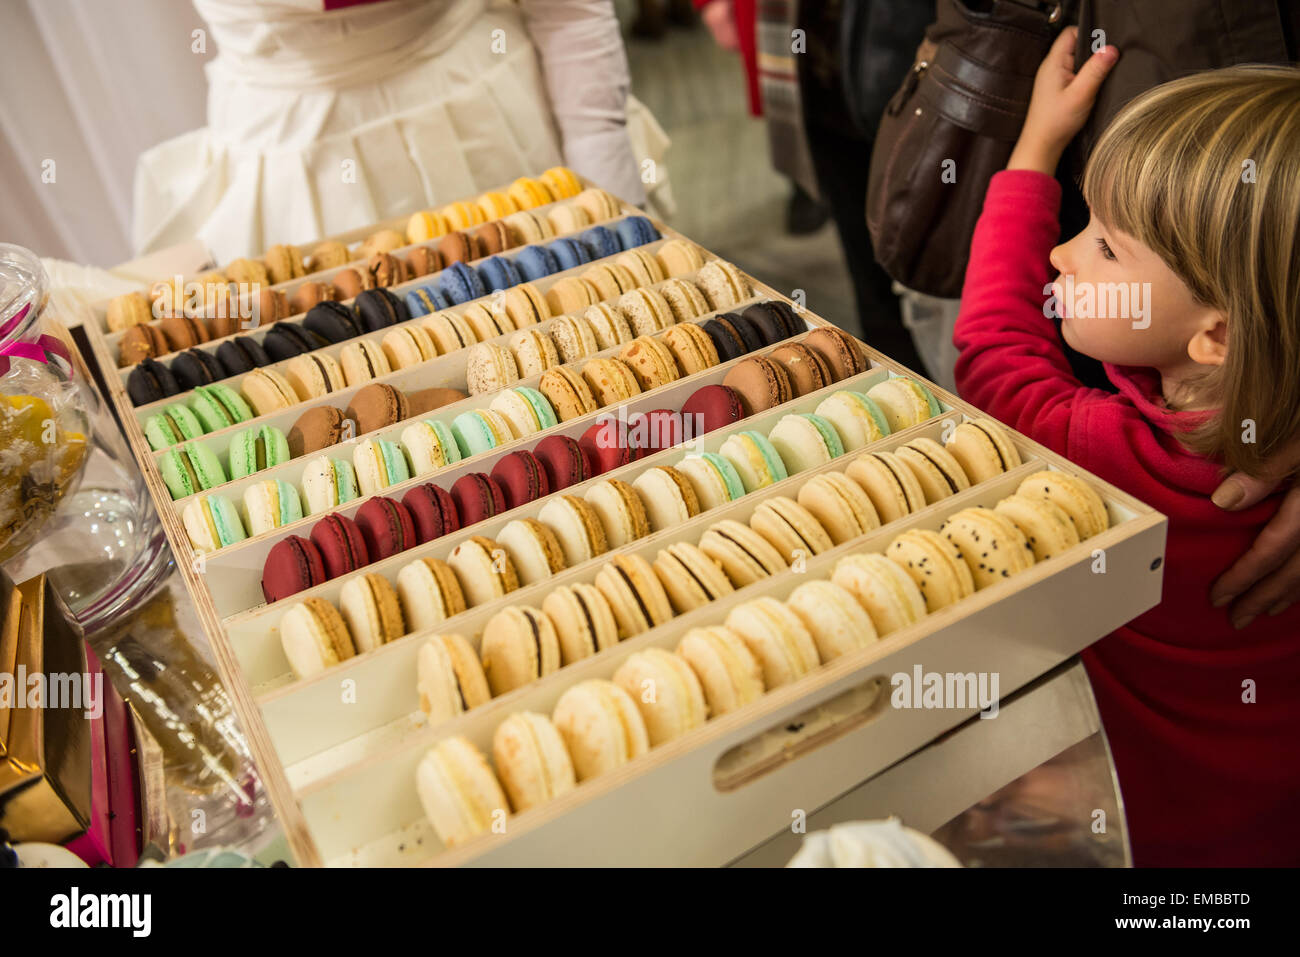 French sweet meringue-based confection called Macaron Stock Photo